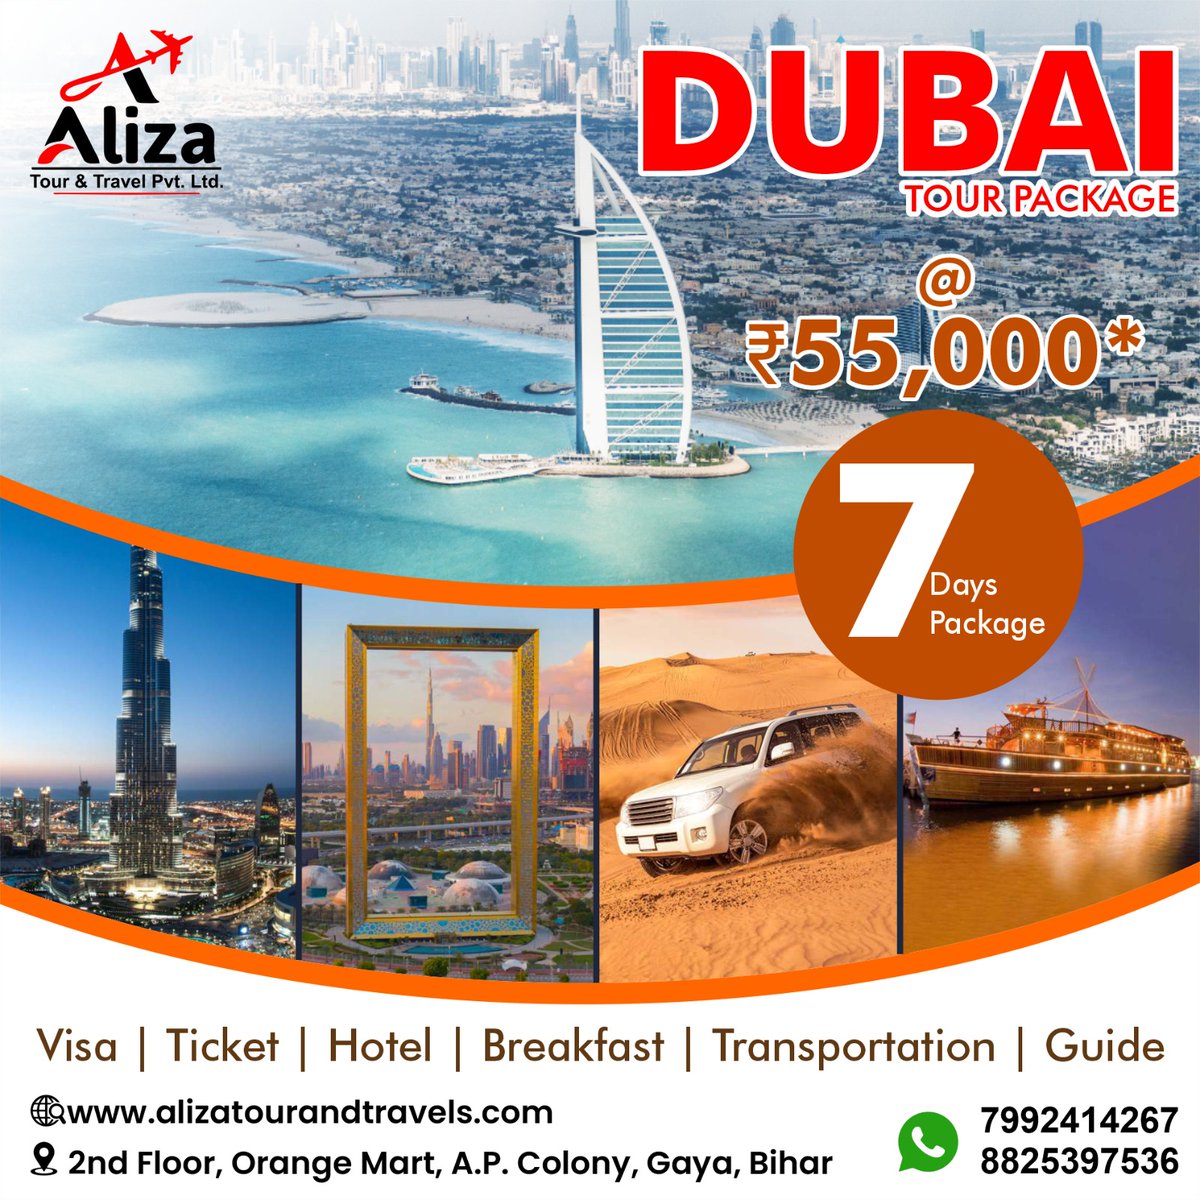 Discover the Magic of Dubai in just 7 days! ✨✈️
Book your dream vacation now at just ₹55,000. Limited seats
available!'
.
.
Call now :- 91 +7992414267/ 8825397536

#VIPDubaiExperience #ExclusiveOffer #DubaiDeals #LimitedSeats #DubaiAdventure #UnforgettableExperience